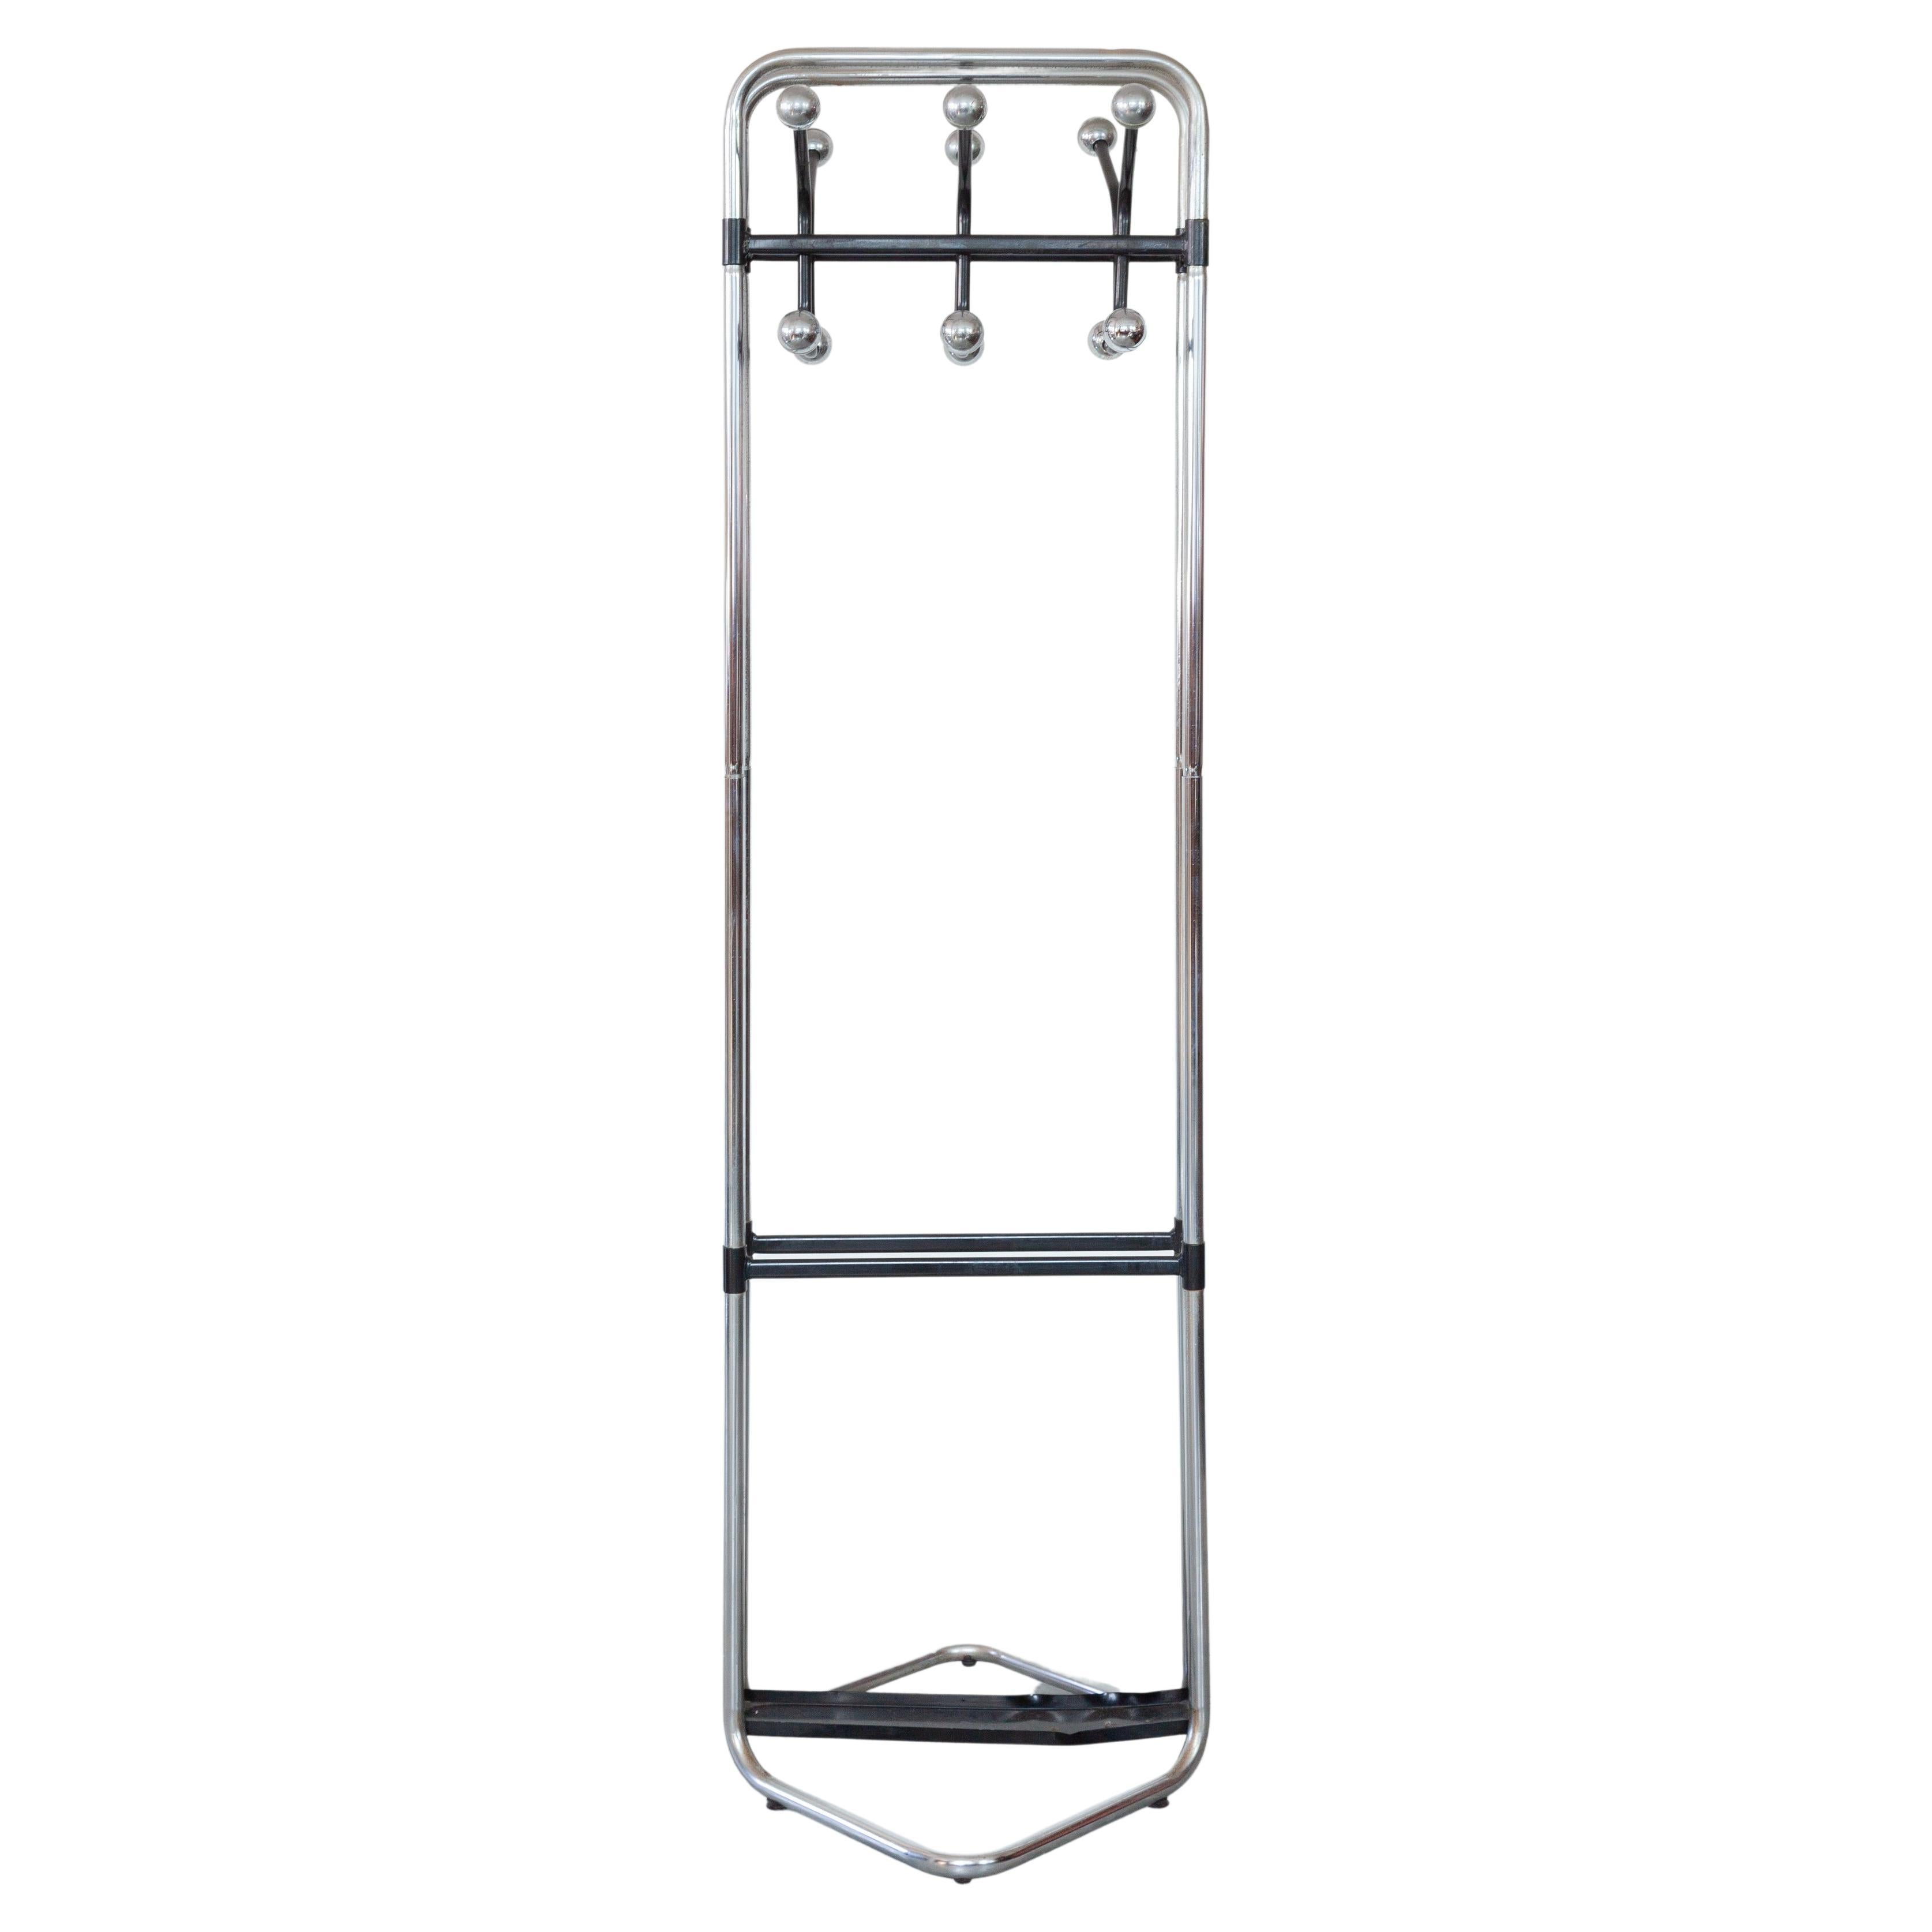 Beautiful bauhaus style free standing coat rack with the functionality to welcome your guests with a great place for storing coats in a hall. The Bauhaus style offers a sleek chrome finish over a tube frame with six chrome hooks finished with a